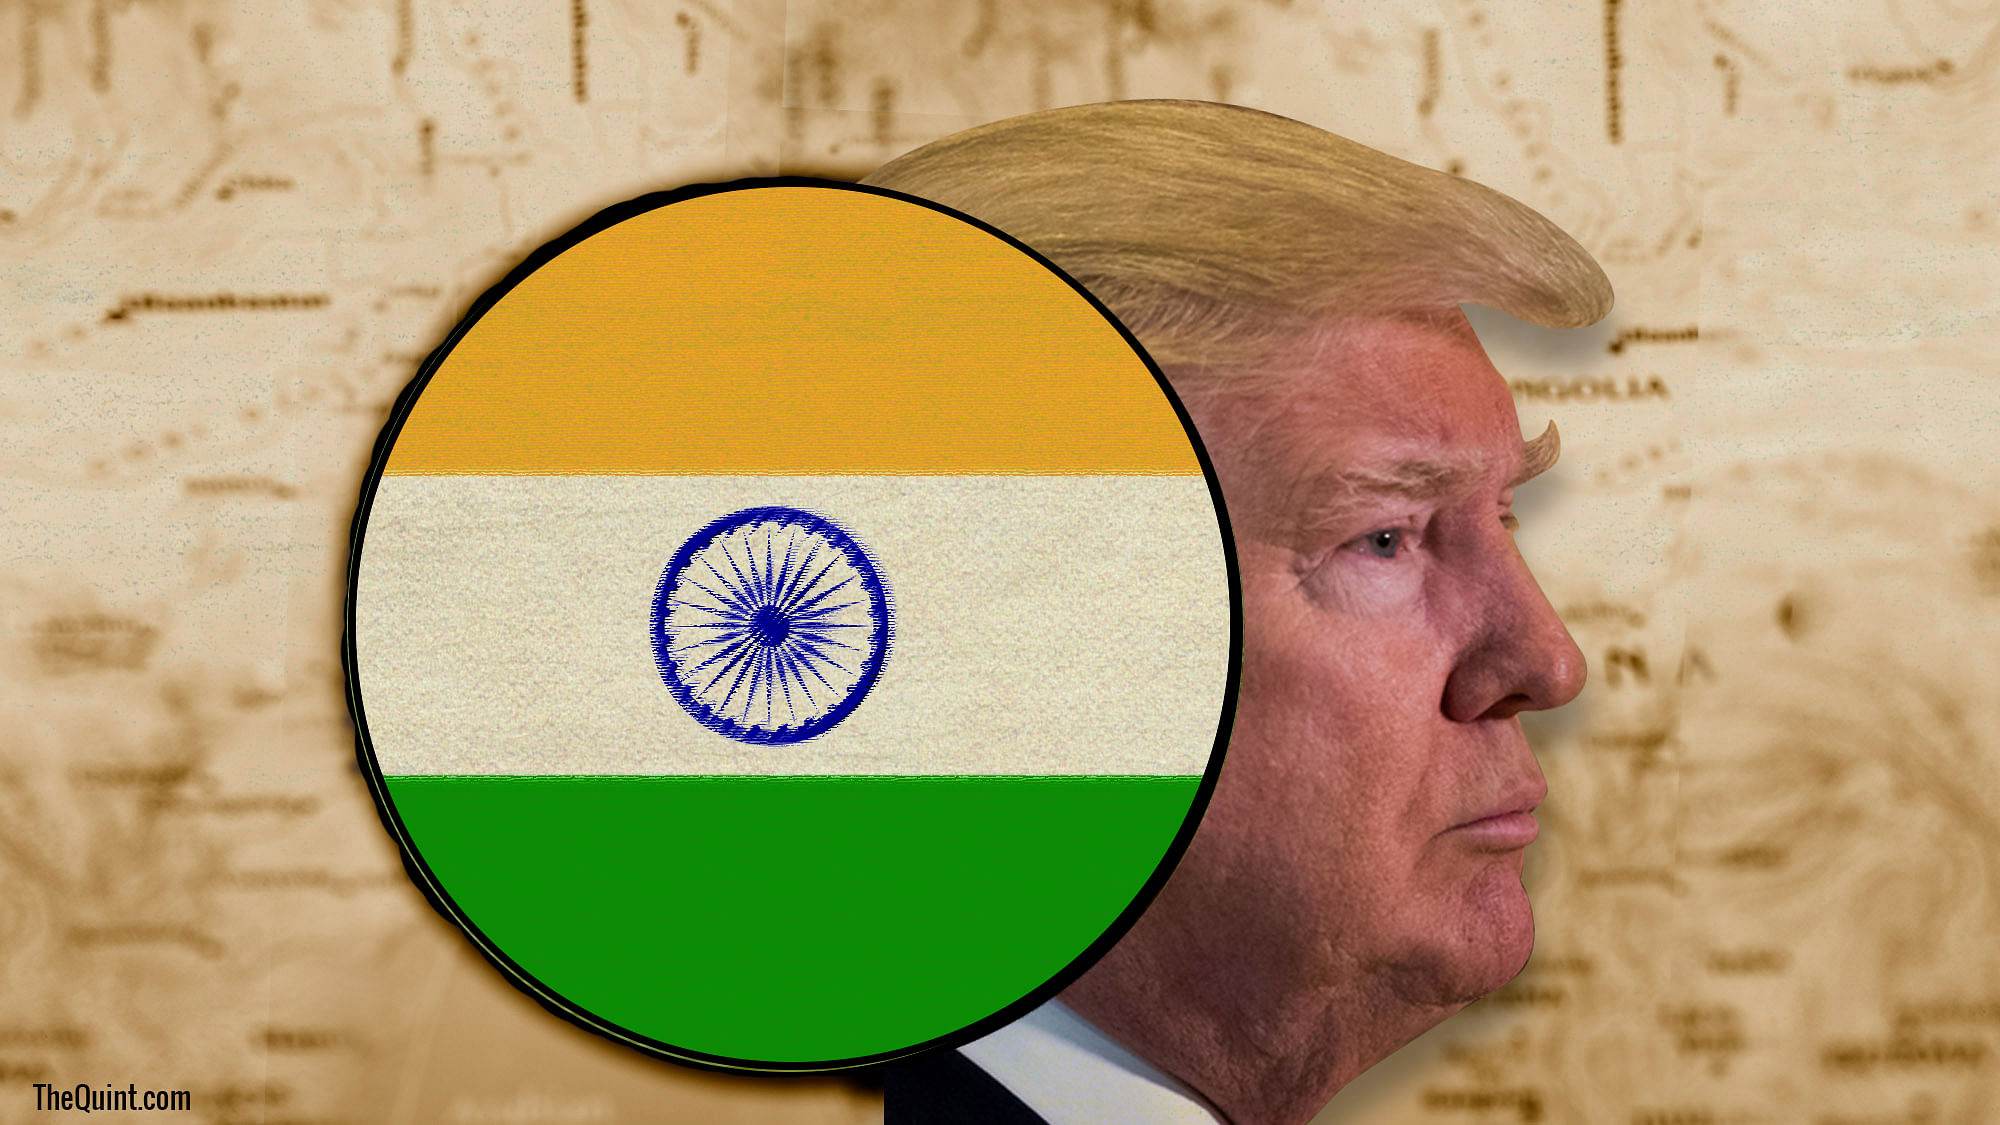 US’ security strategy clearly recognises India as an emerging global superpower.